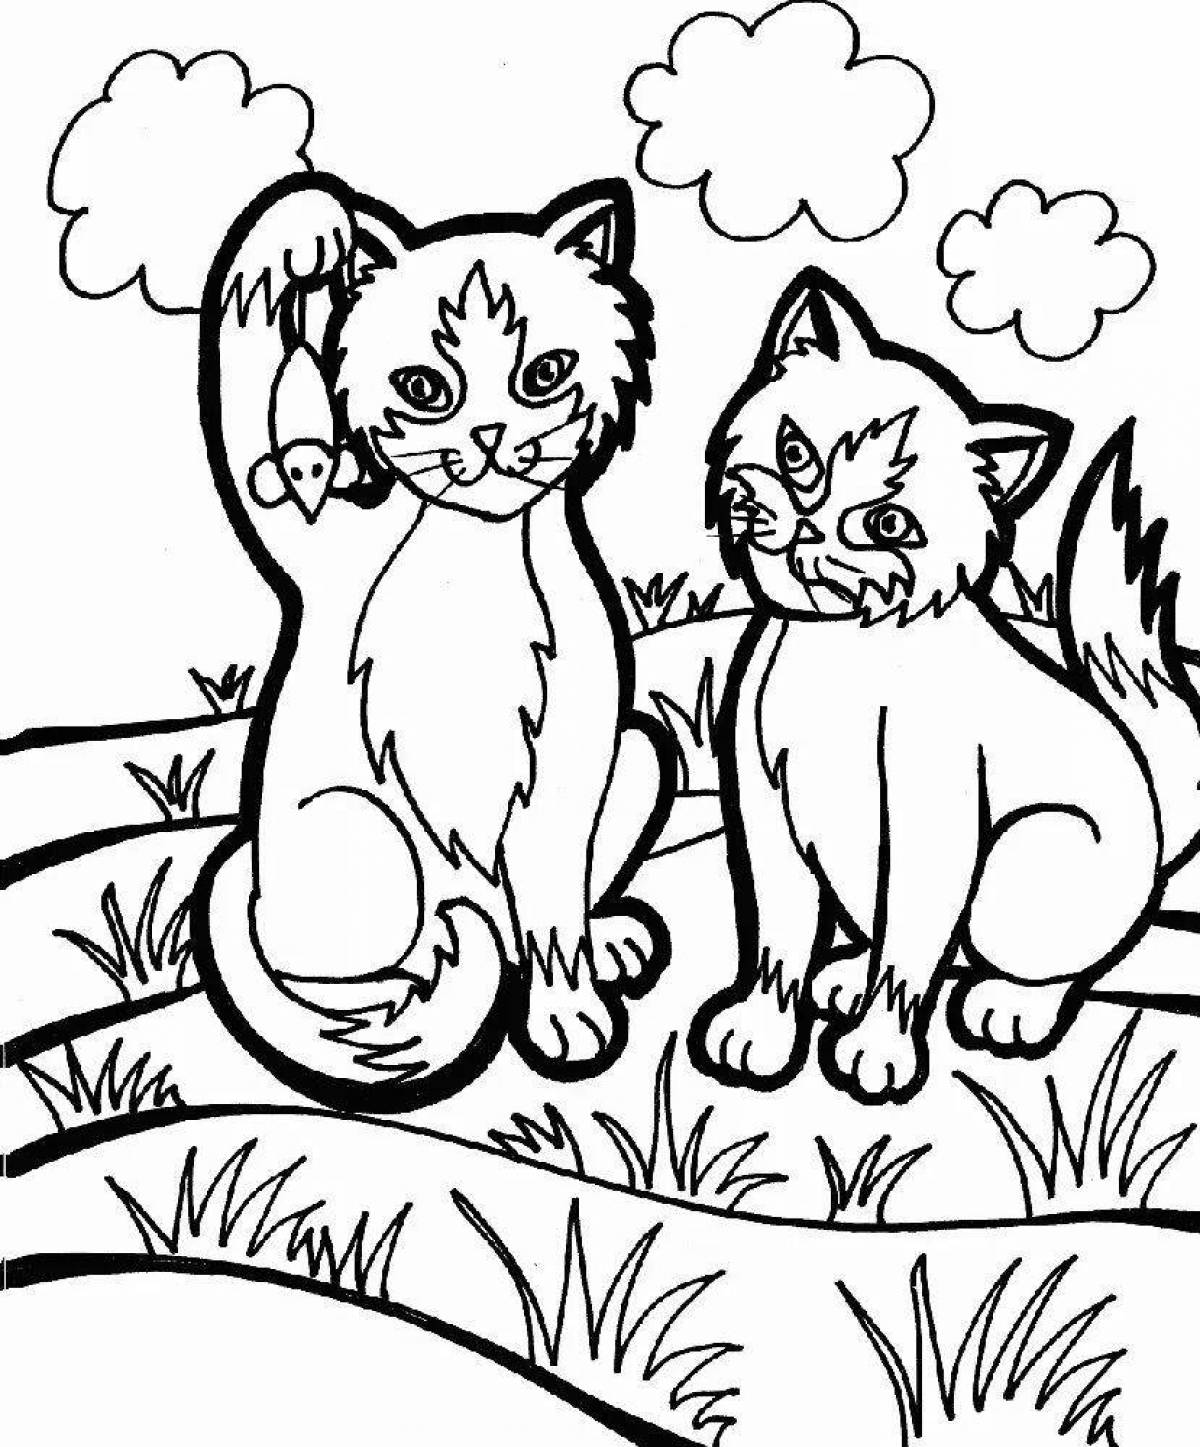 Cats and kittens playful coloring book for girls